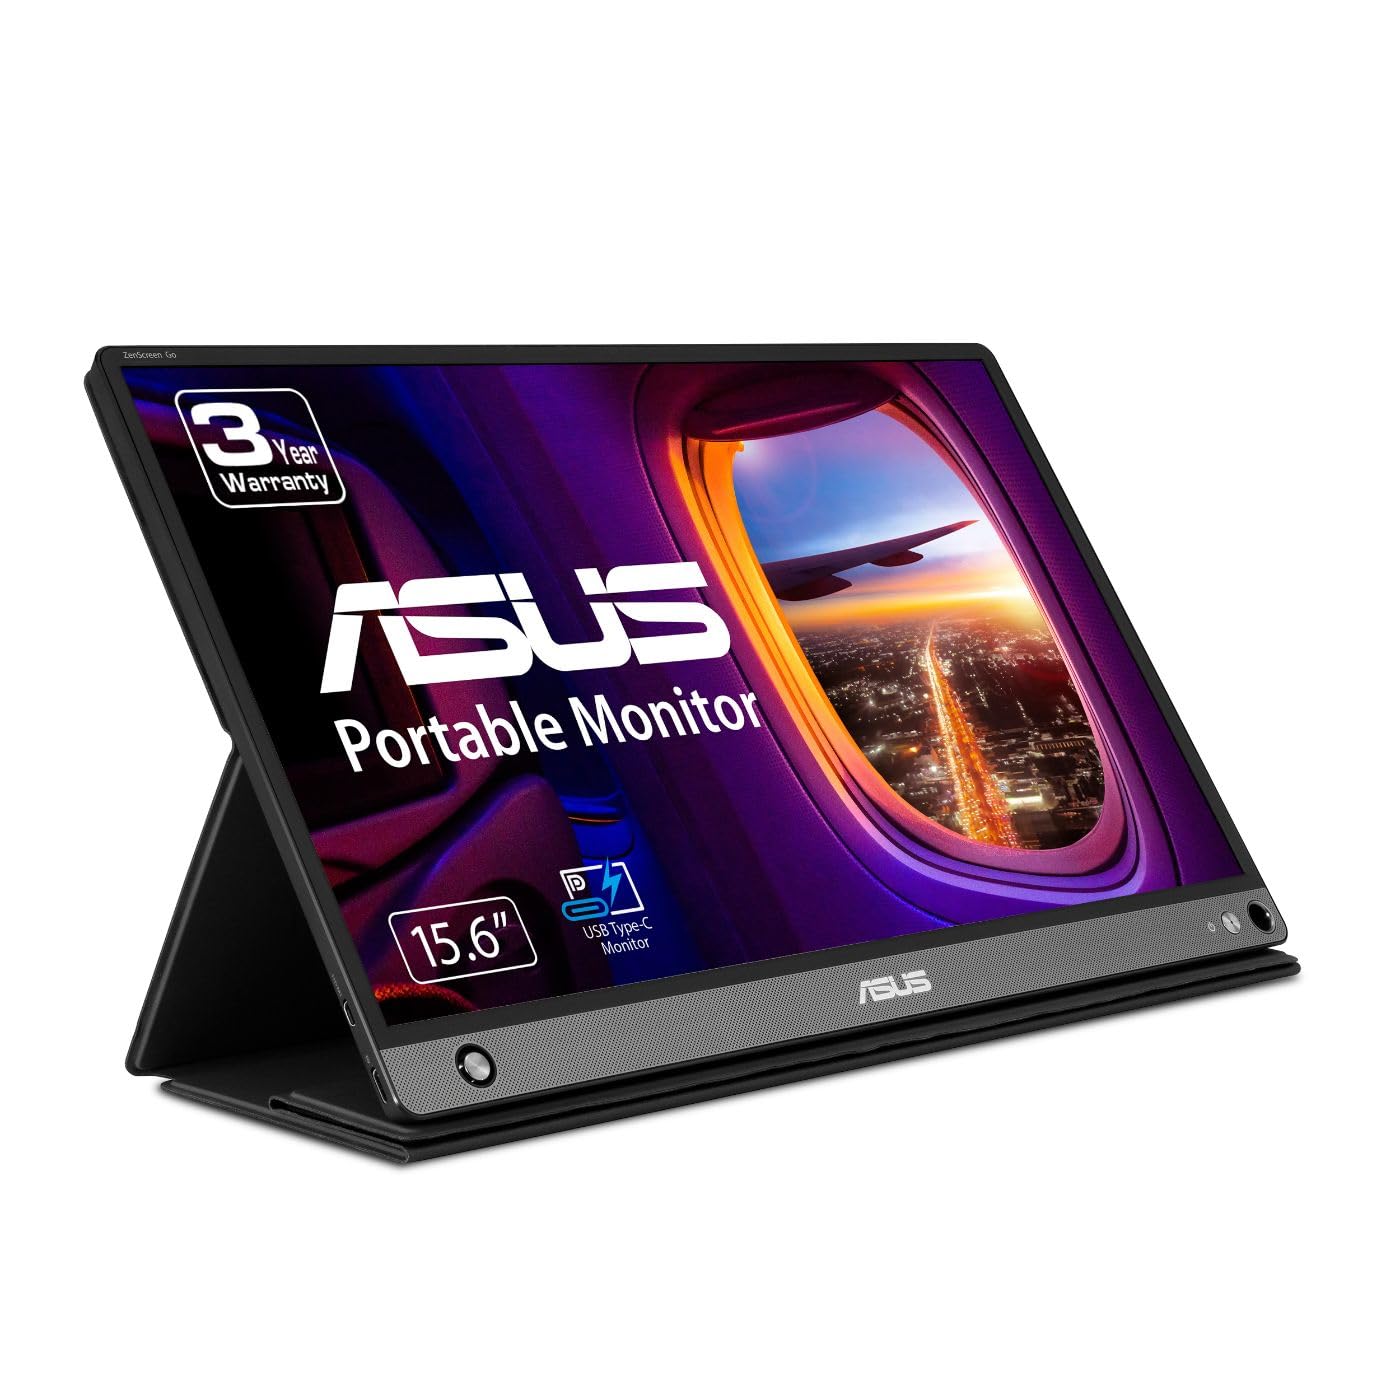 ASUS ZenScreen 15.6” 1080P Portable USB Monitor (MB16AHP) - Full HD, IPS, Eye Care, Micro HDMI, USB Type-C, Speakers, Built-in Battery, External Screen for Laptop, 3-Year Warranty,Black